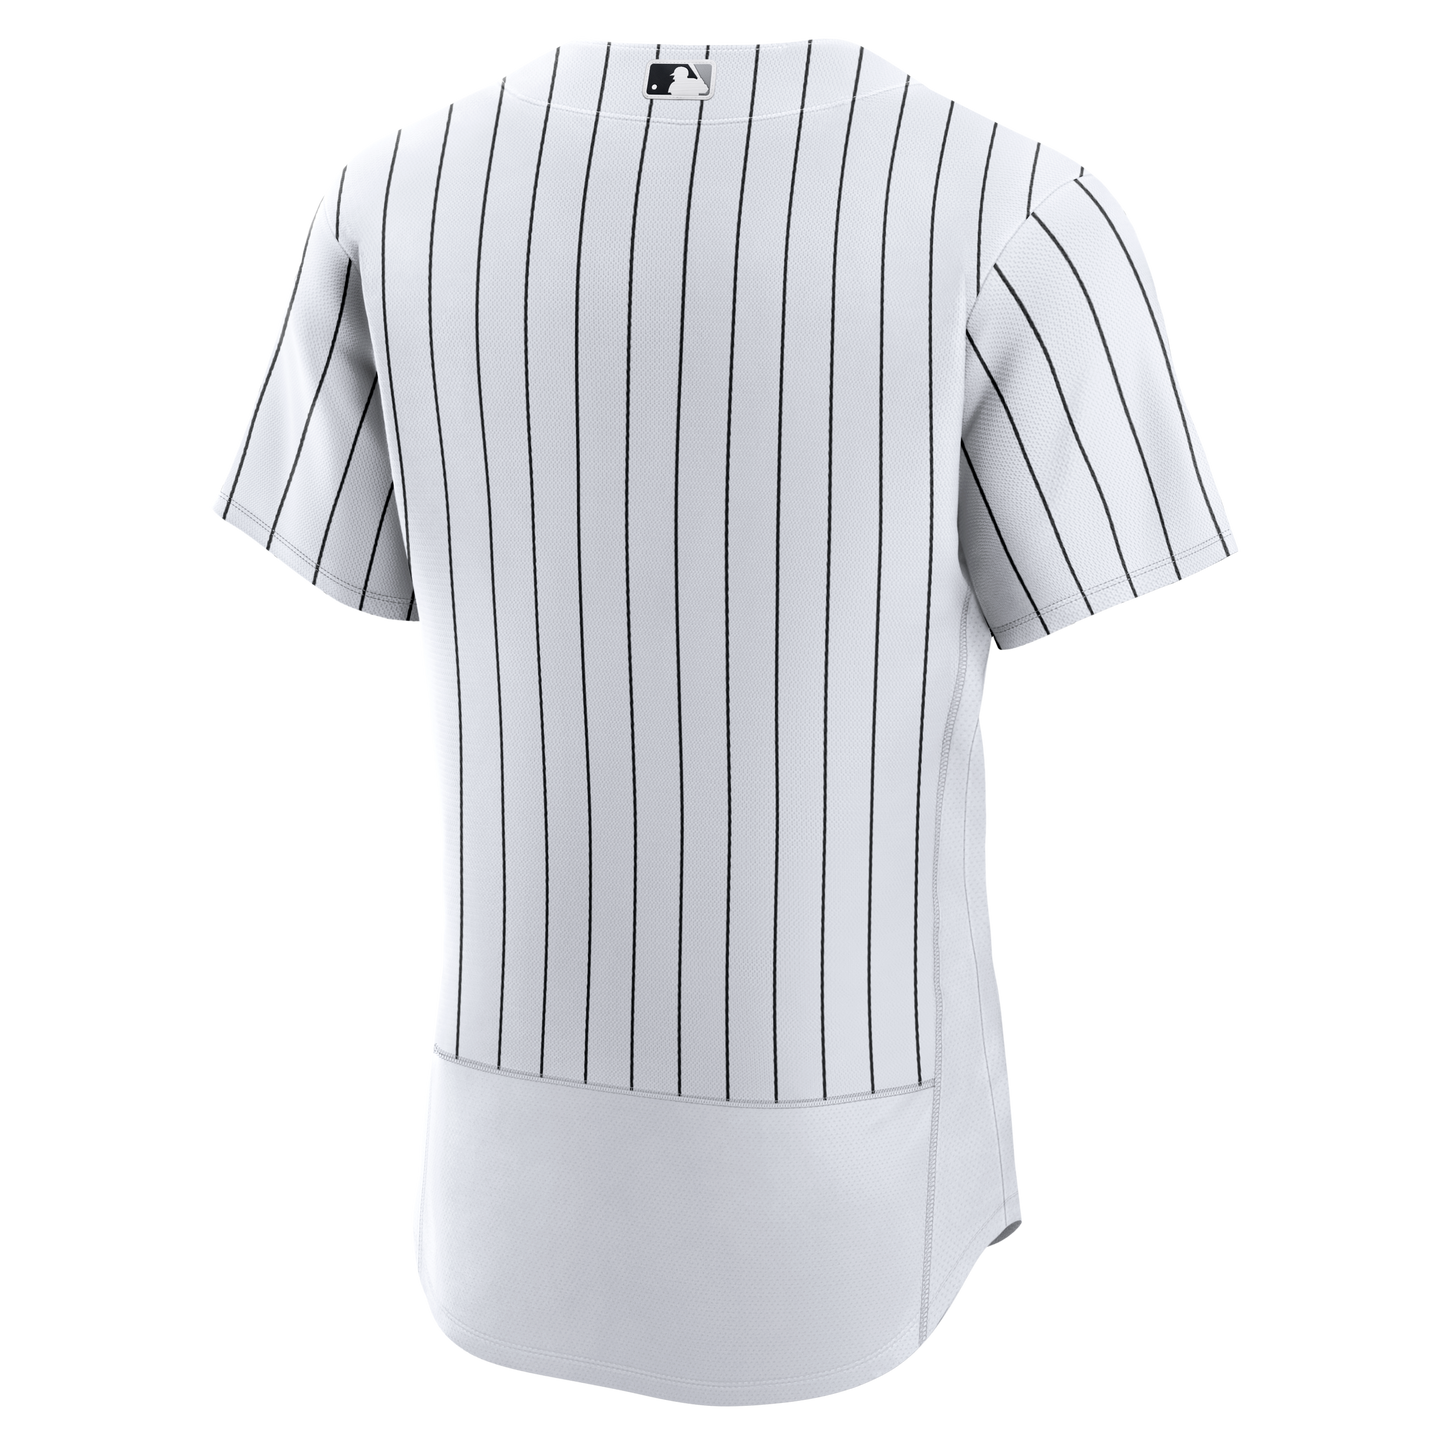 Chicago White Sox Nike Men's White Home Authentic Team Jersey